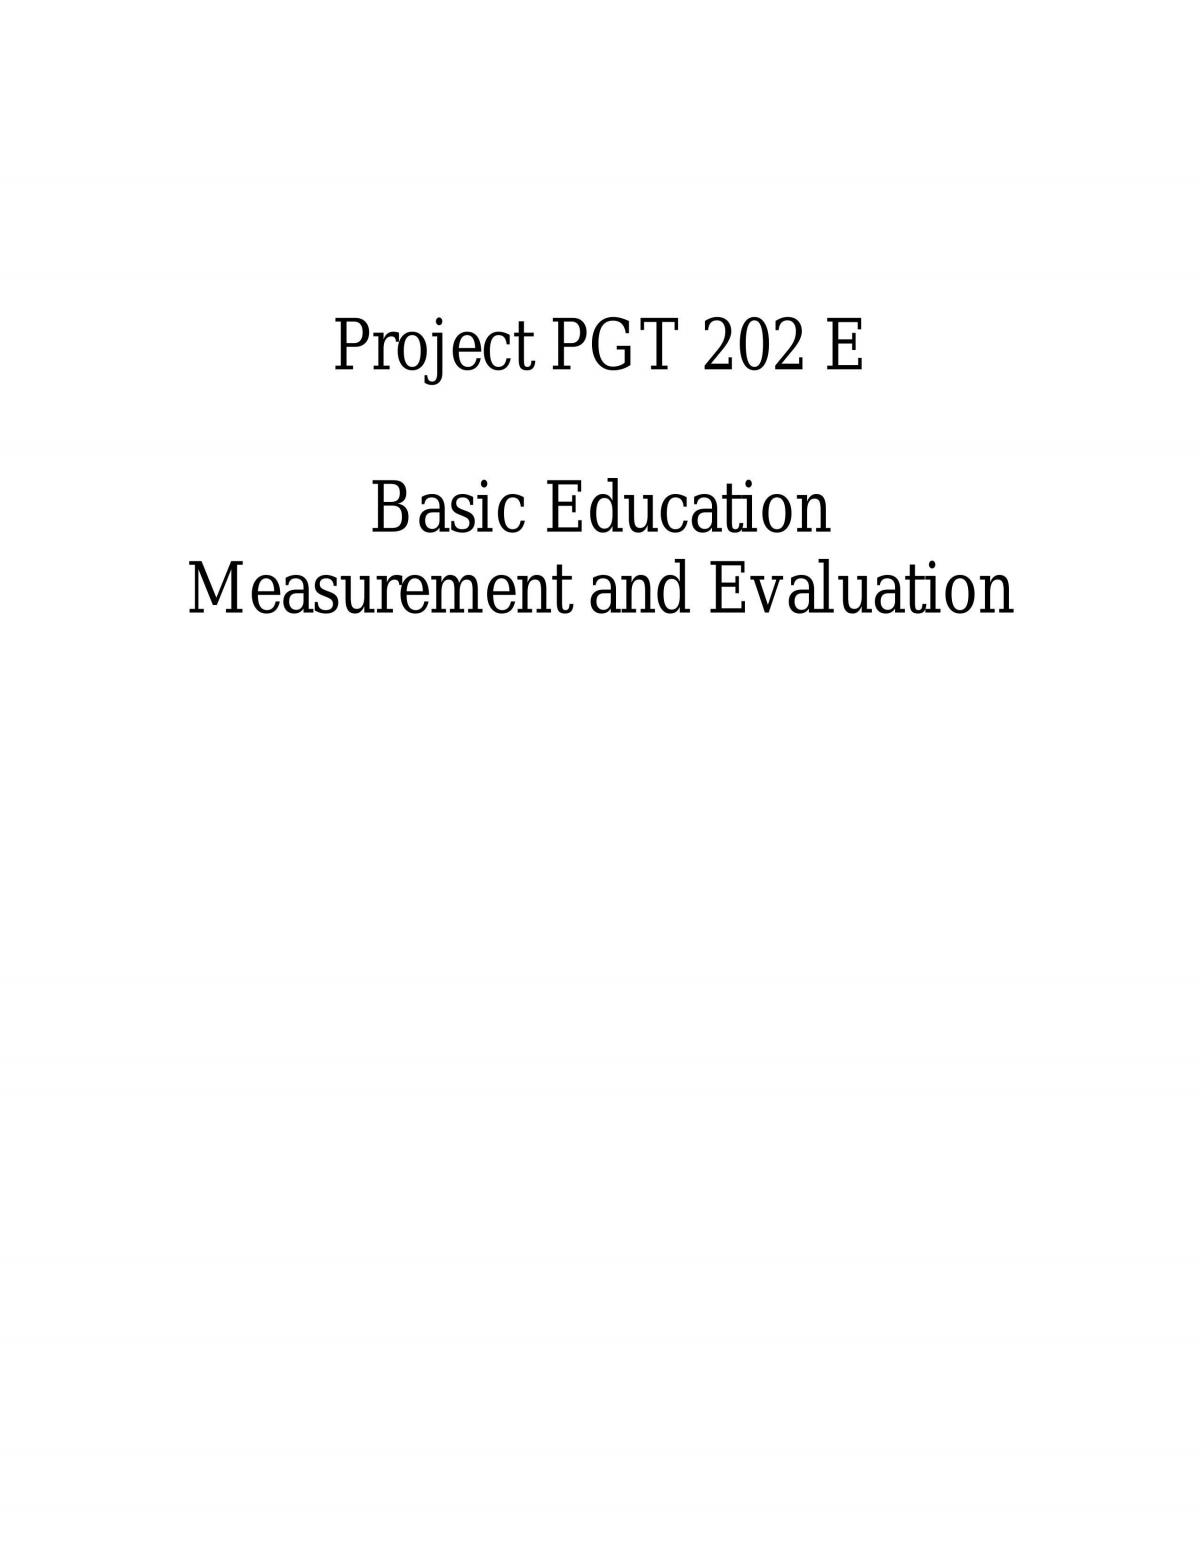 Project of PGT202E - Page 1